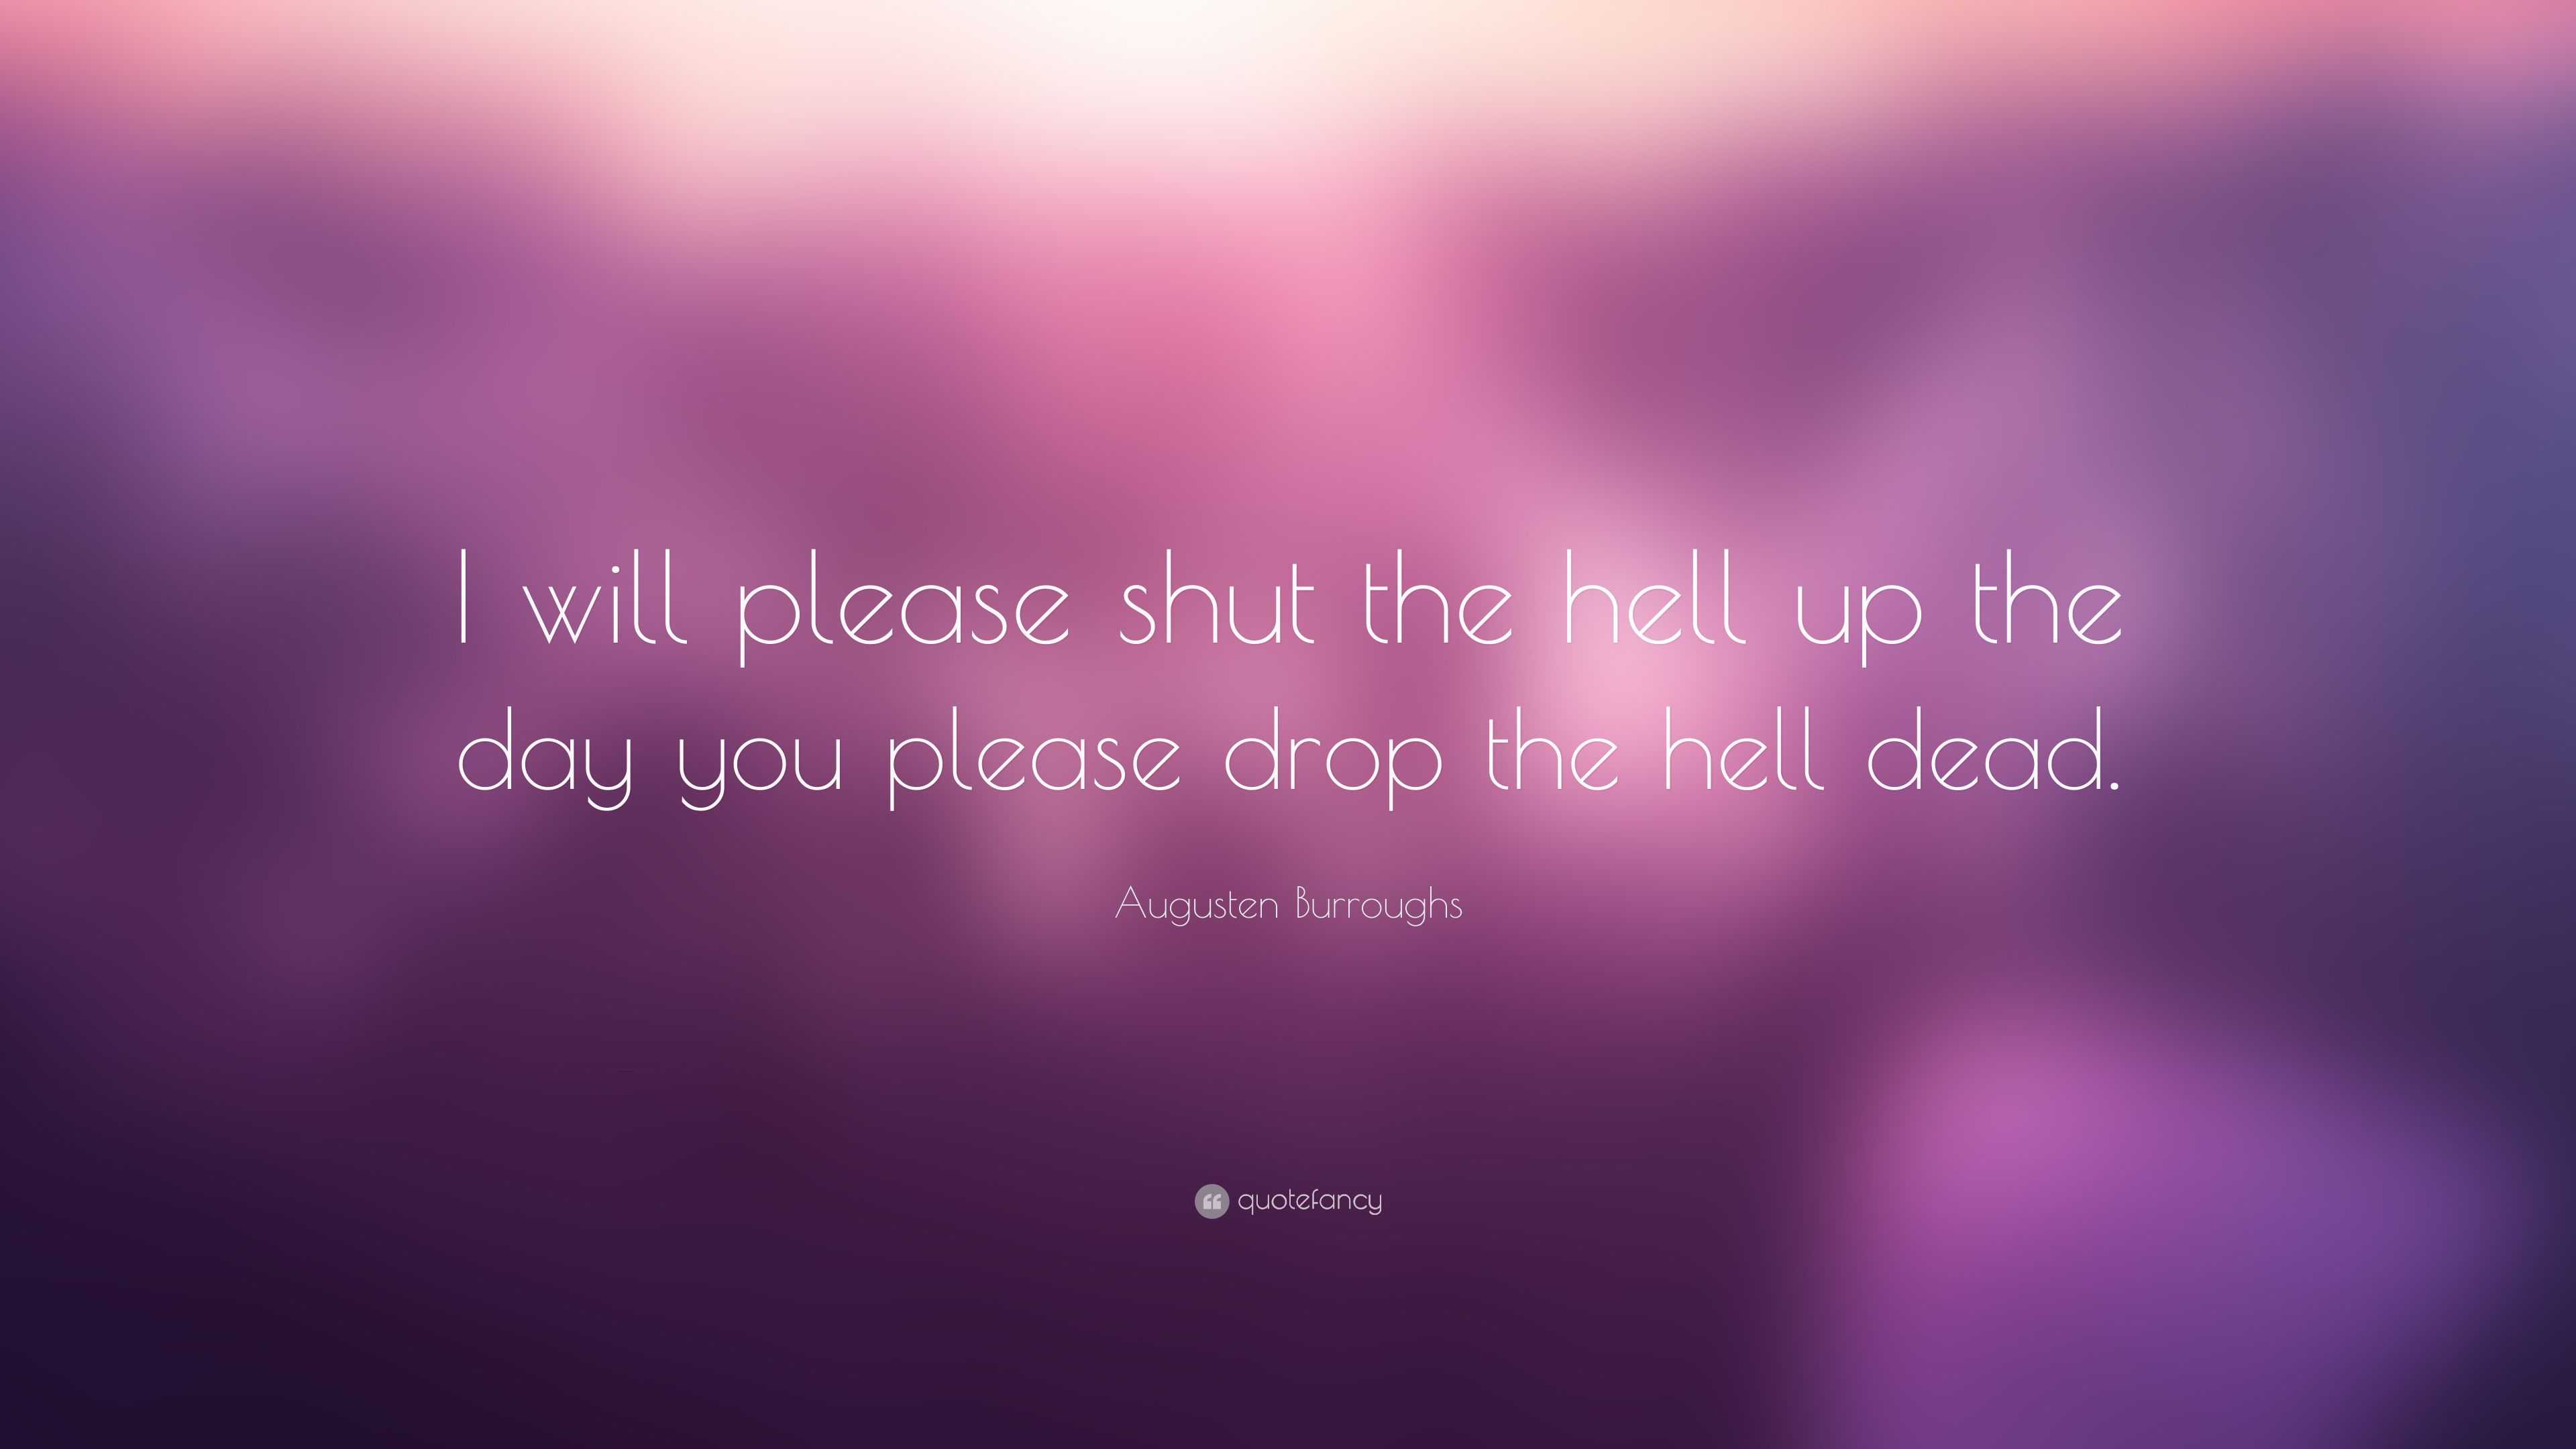 Augusten Burroughs Quote: “I will please shut the hell up the day you ...